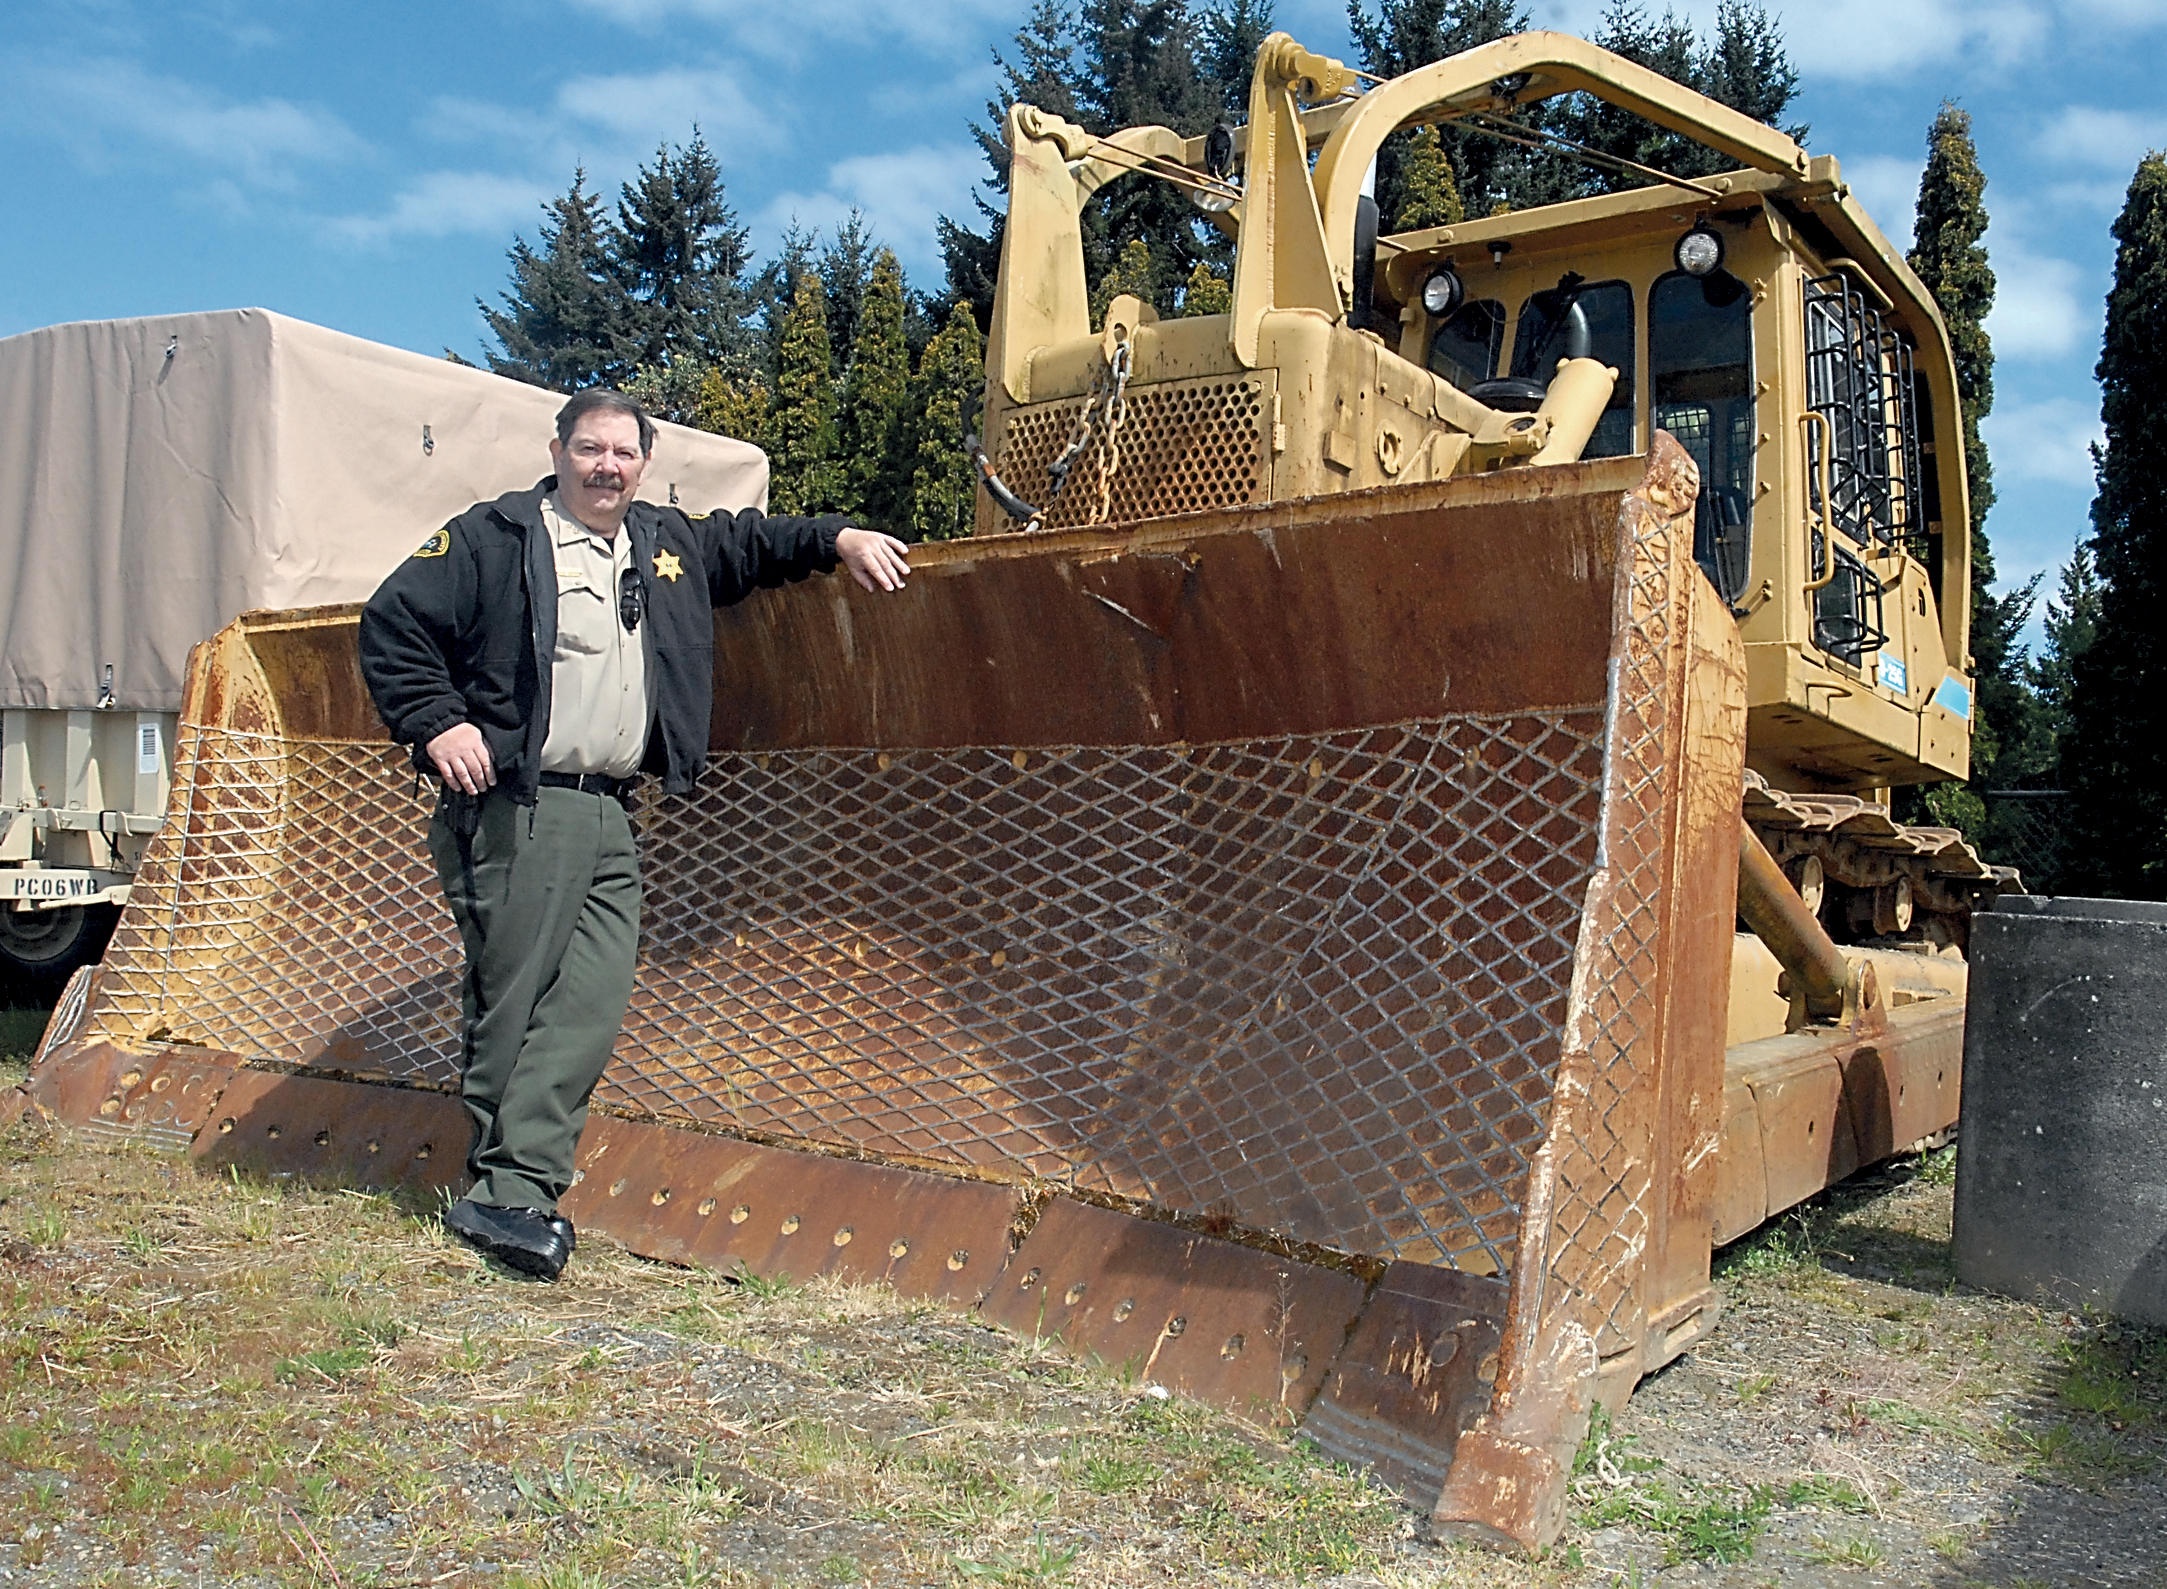 Clallam County Undersheriff Ron Cameron stands with the logging bulldozer that was used during the May 10